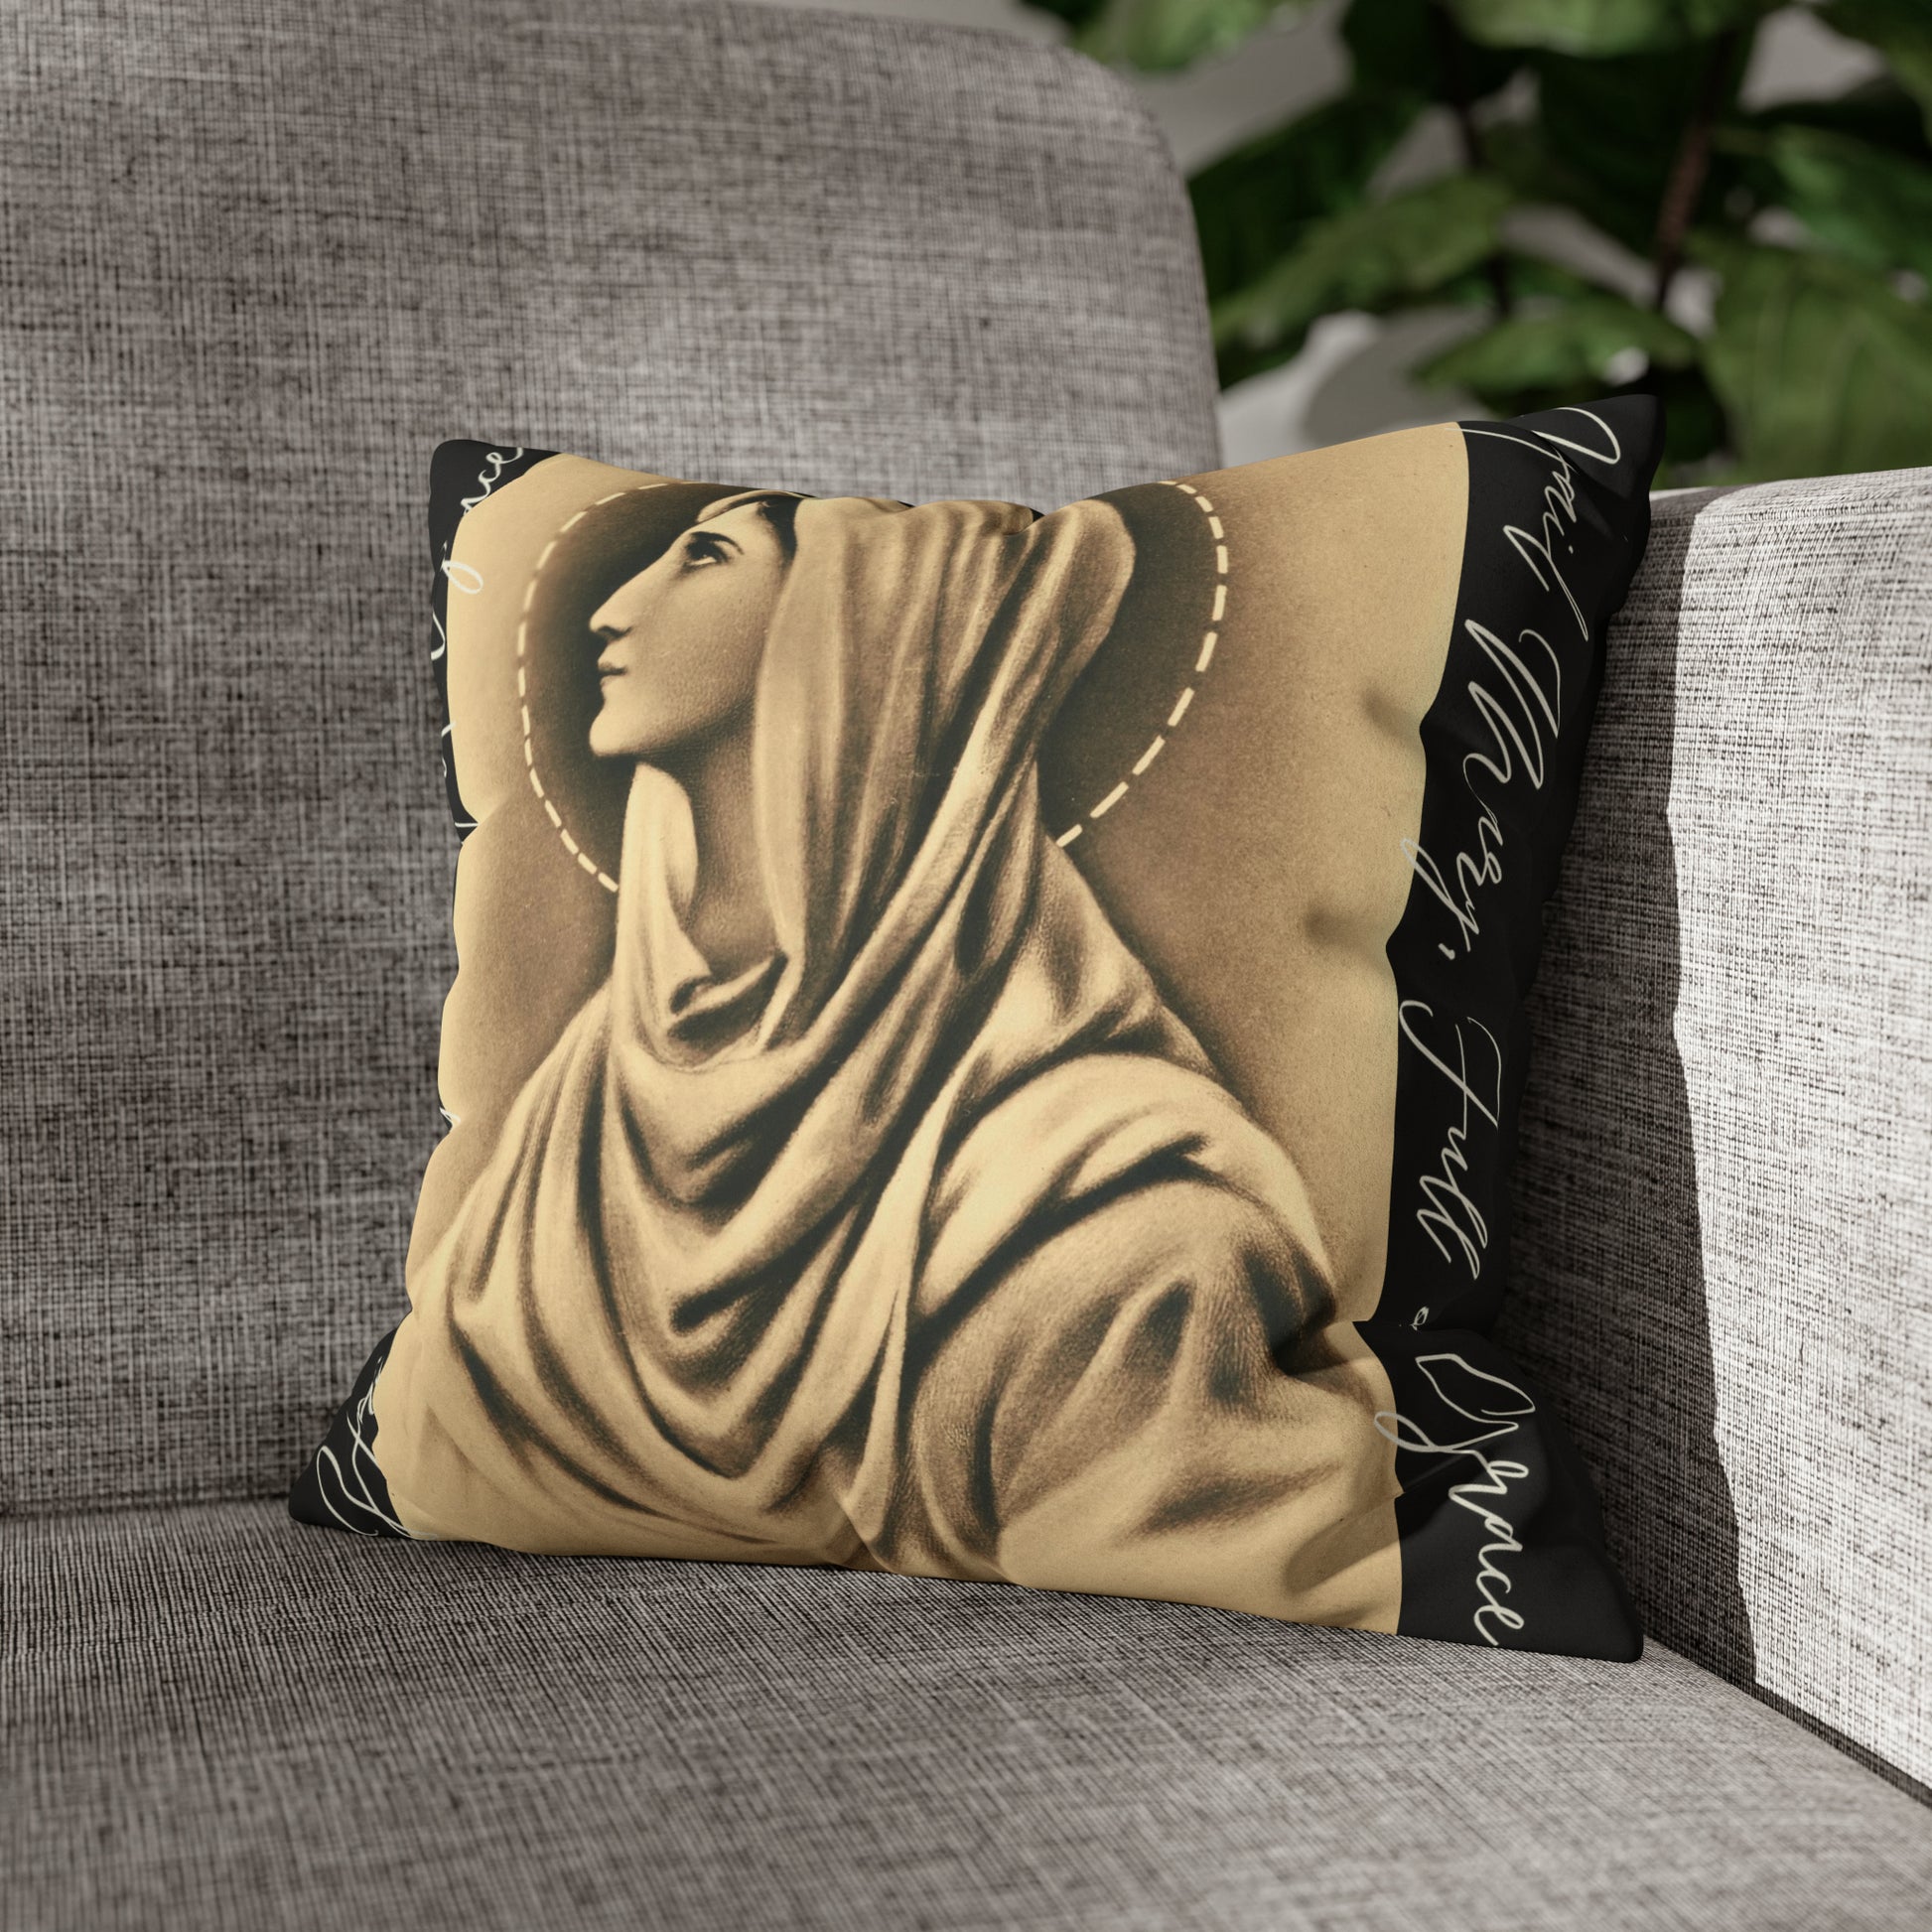 Hail Mary Full of Grace - Faux Suede Square Pillow Case - Studio Lams Creative Collective